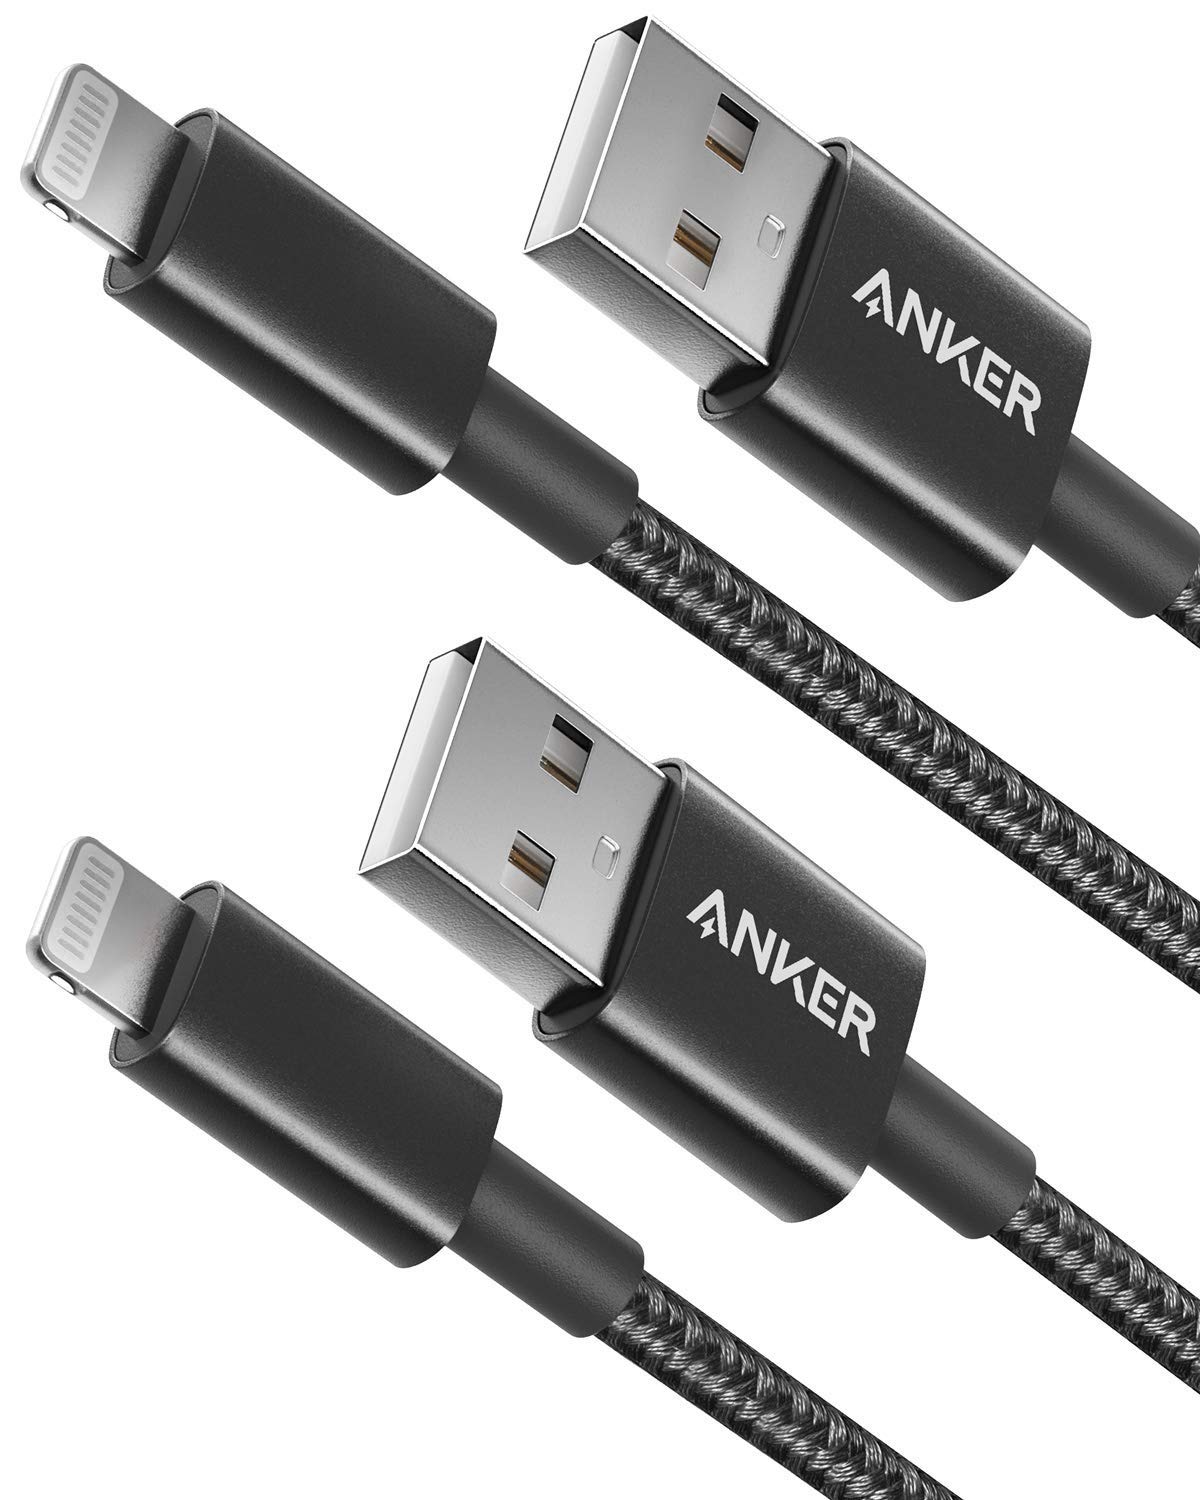 Anker 3.3ft Premium Nylon Lightning Cable [2-Pack], Apple MFi Certified for iPhone Chargers, iPhone Xs/XS Max/XR/X / 8/8 Plus / 7/7 Plus / 6/6 Plus / 5s, iPad Pro Air 2, and More(Black)